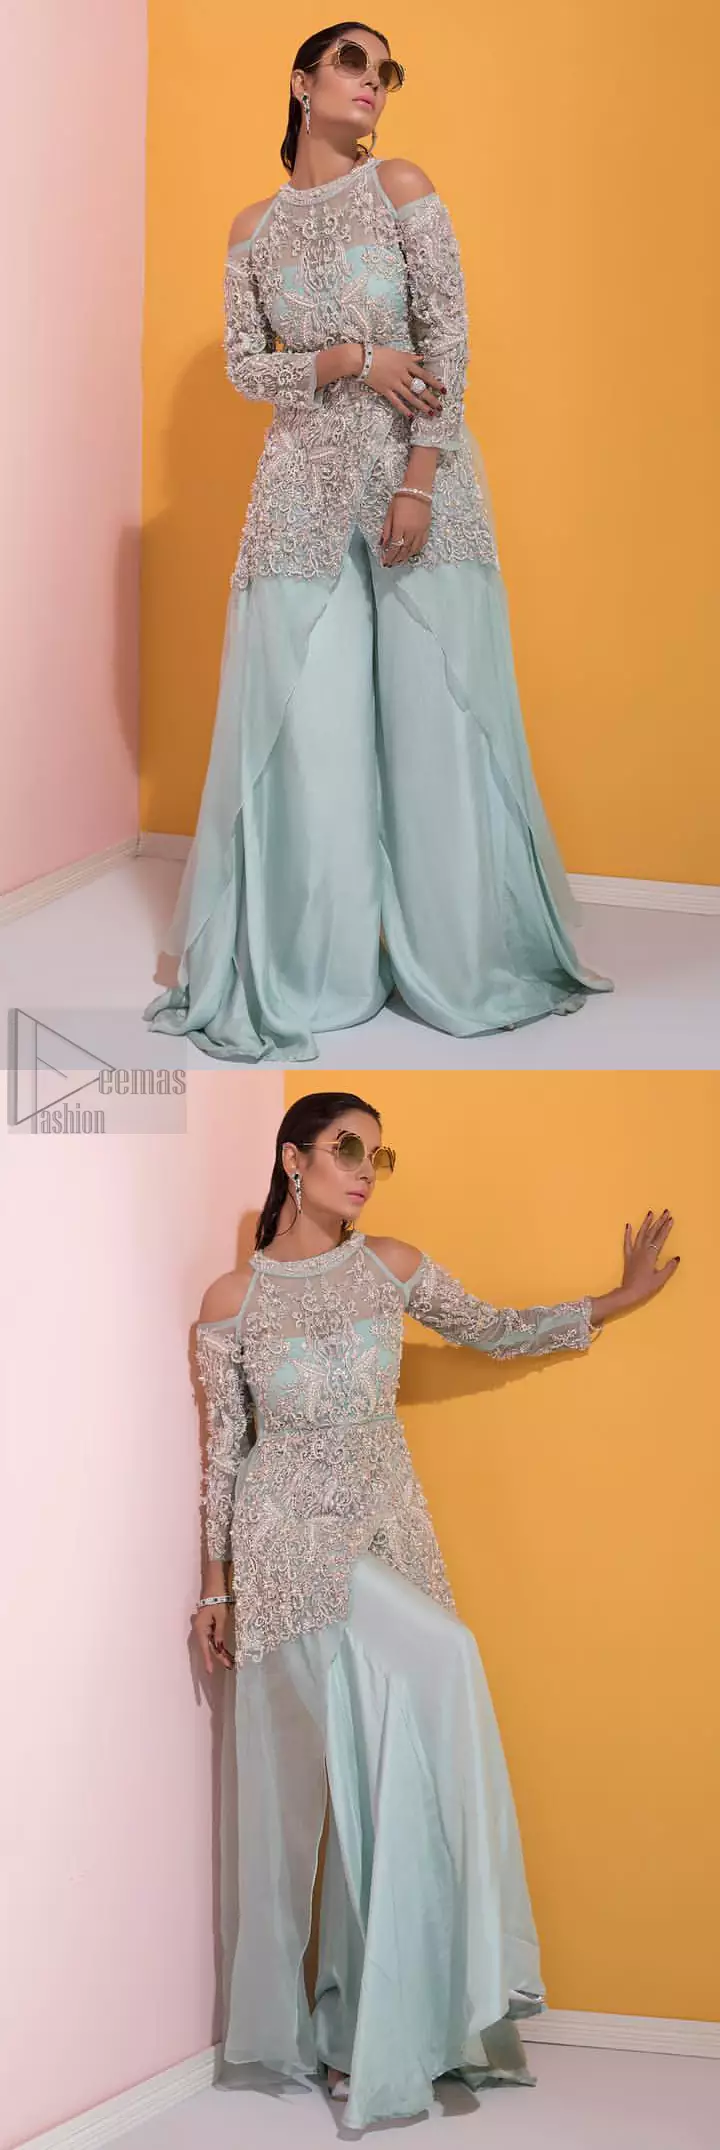 A fashion forward style statement that is contemporary yet chic. This handcrafted remarkable ensemble includes art deco design elements. Unique craftsmanship and detailed embellishments on the pastel green shirt creating delicate yet flamboyant pieces of art in your wardrobe collection. Cold Shoulder sleeves and halter illusion neckline make it more remarkable. To complete the look, go with palazzo pants and organza dupatta sprinkled with sequins all over.